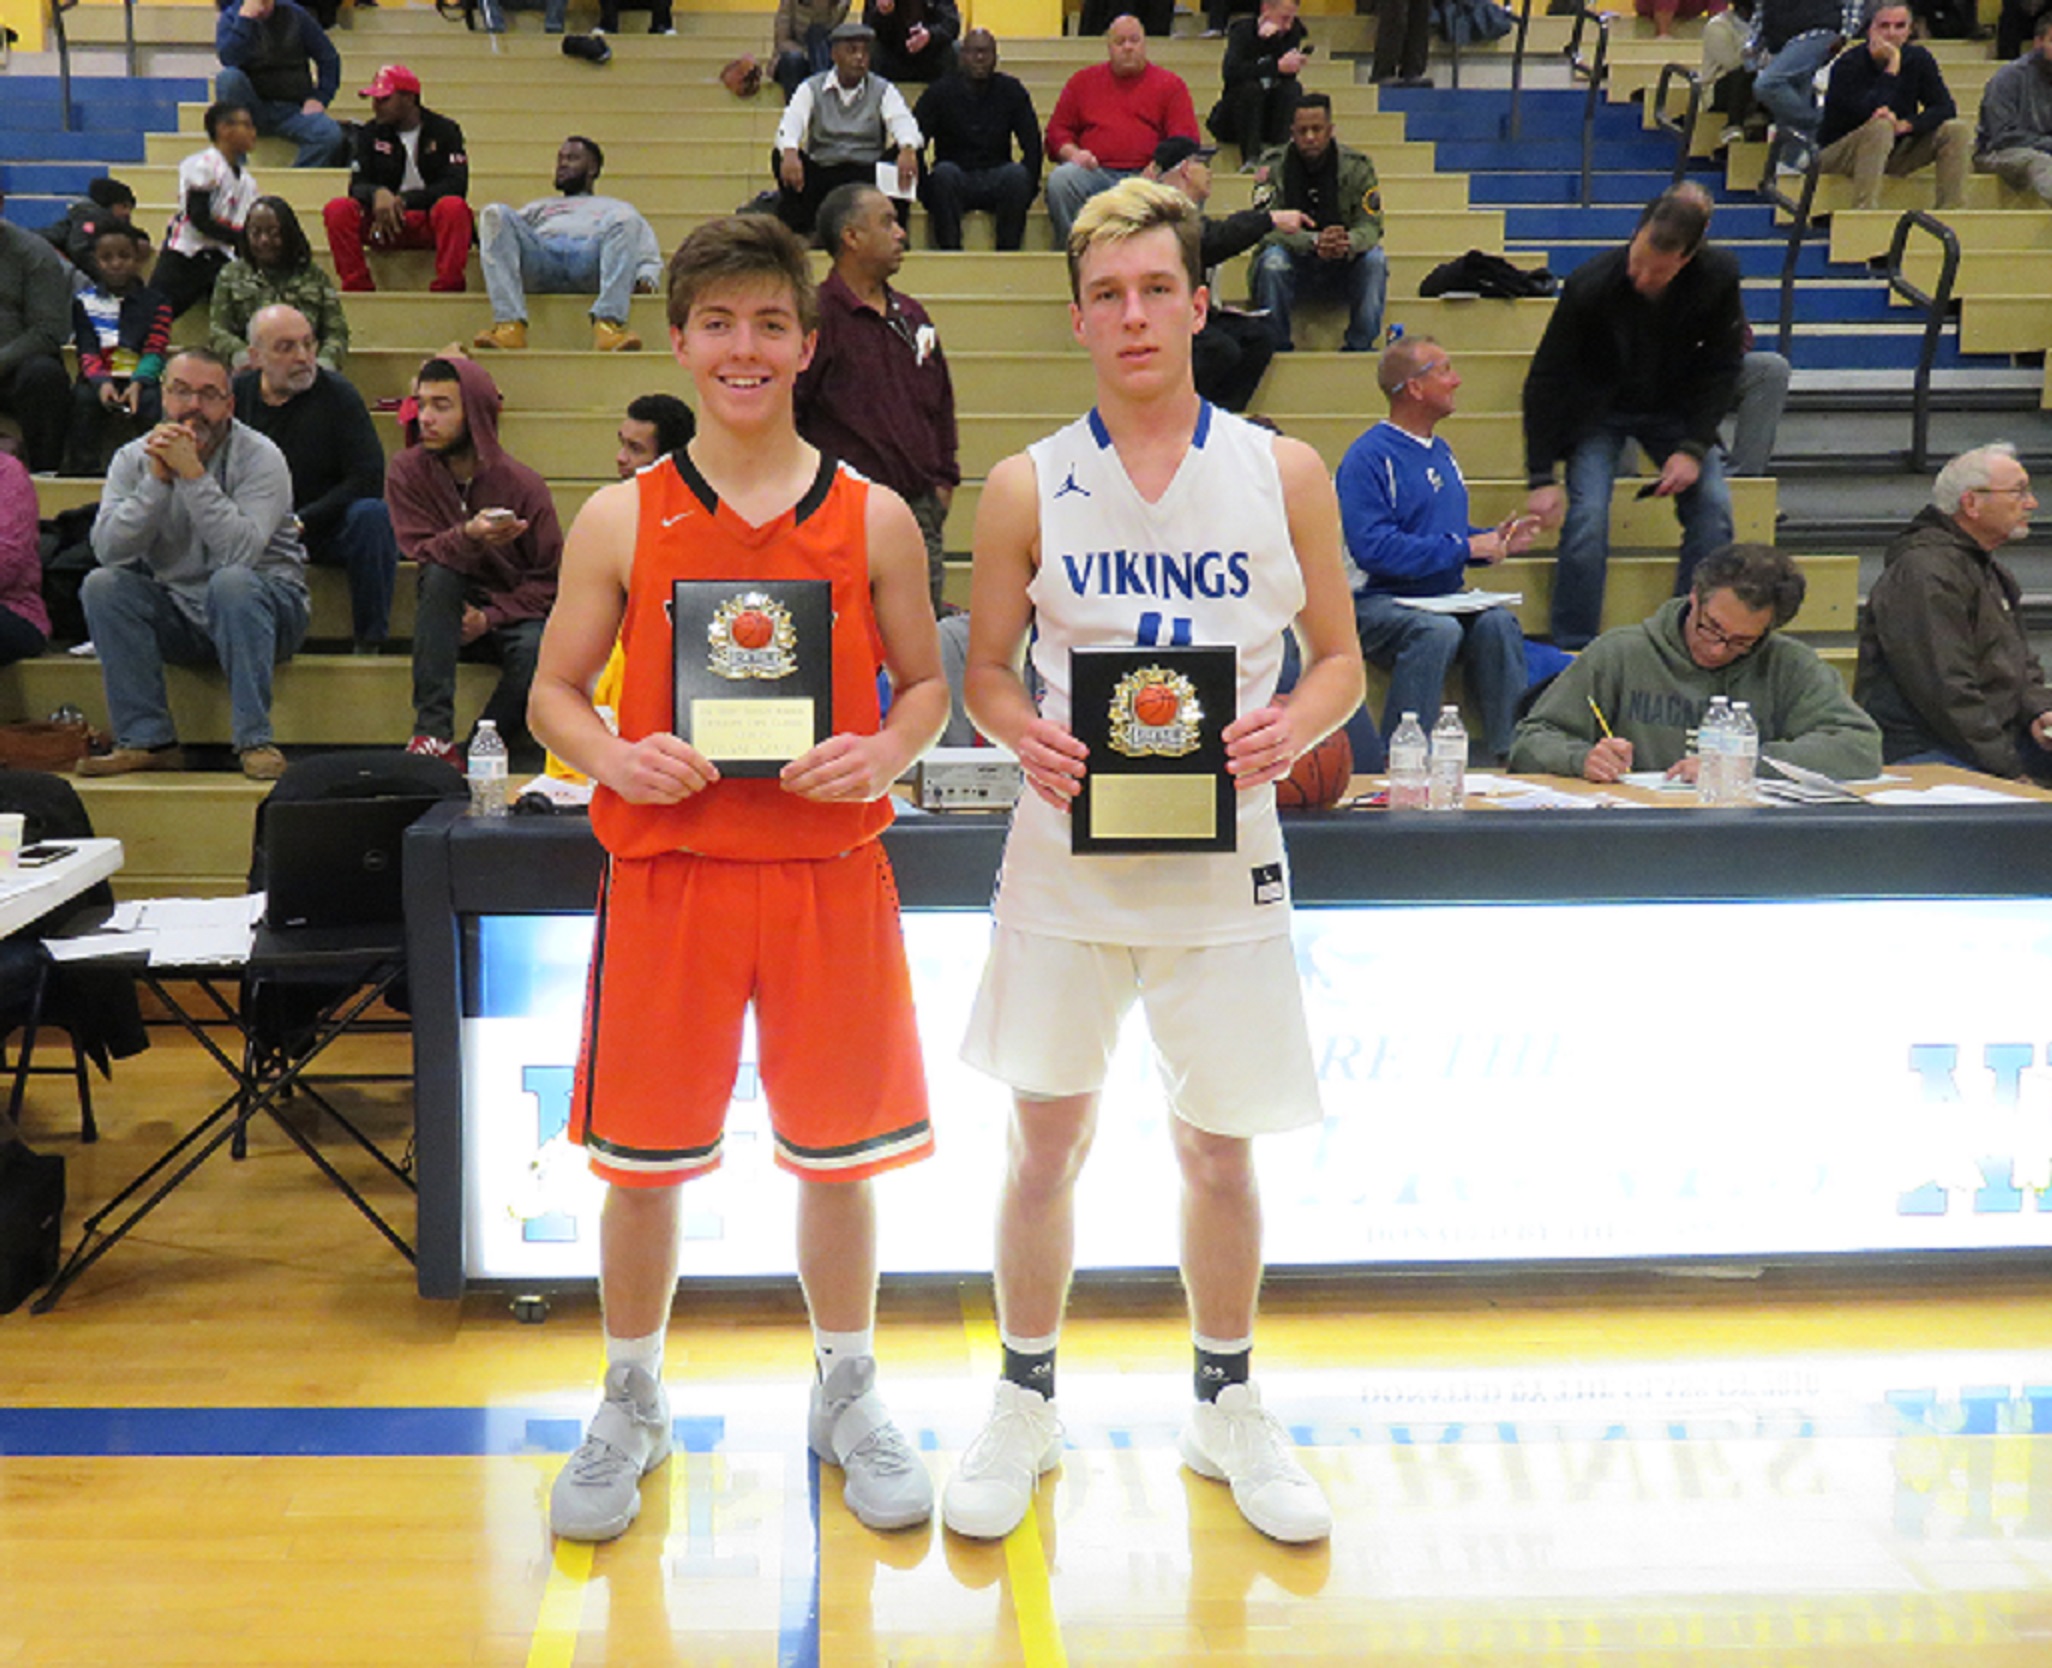 Game MVP's from Saturday night's Grand Island-Wilson game. Left to right: Nate Fox of Wilson, and Cam Sionko of Grand Island stand with their winning plaques. (Photo by David Yarger)